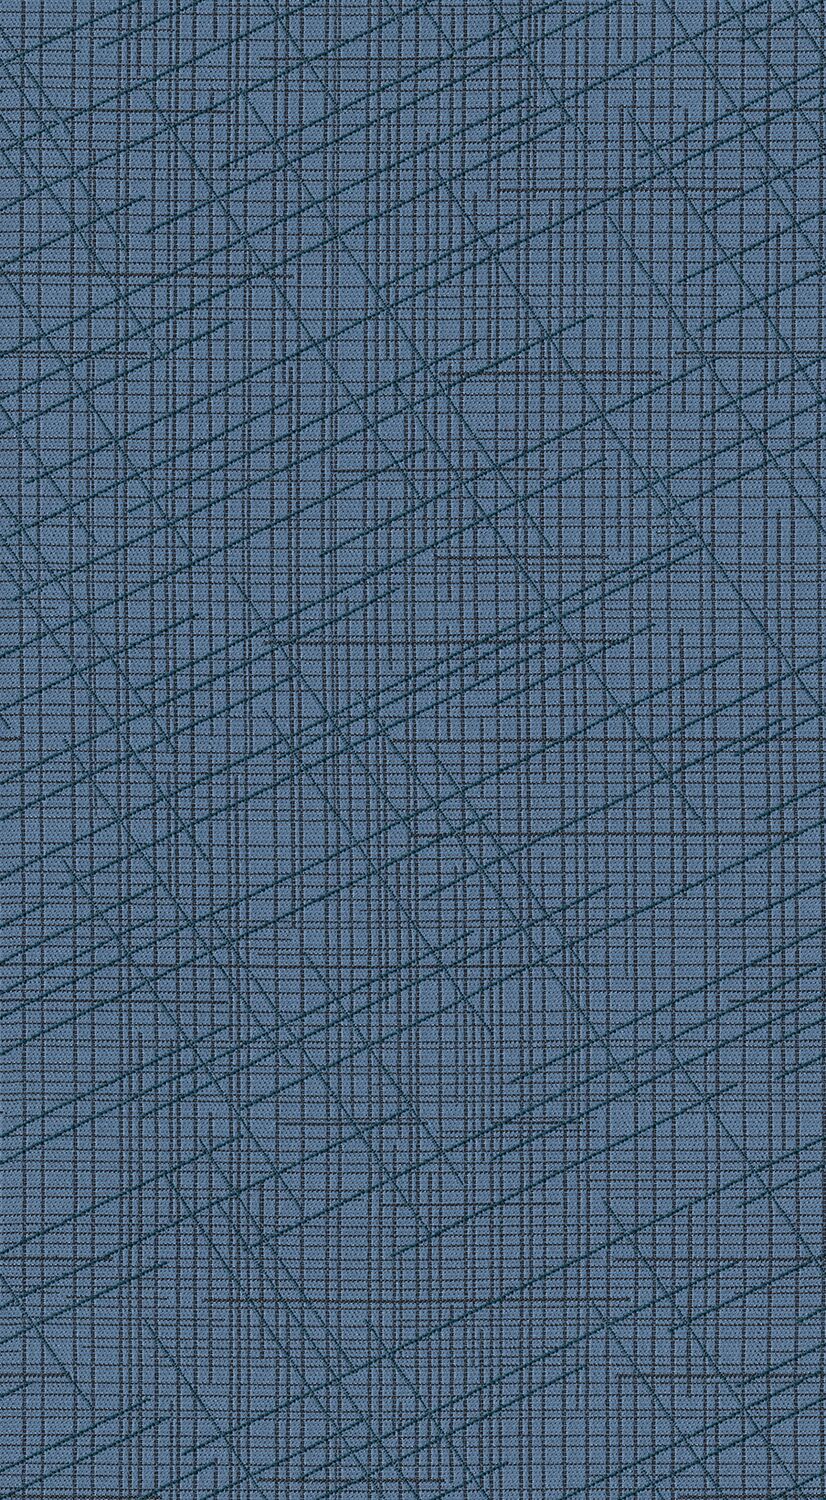 Intraweb - Isosurface - 2002 - 09 - Half Yard Tileable Swatches